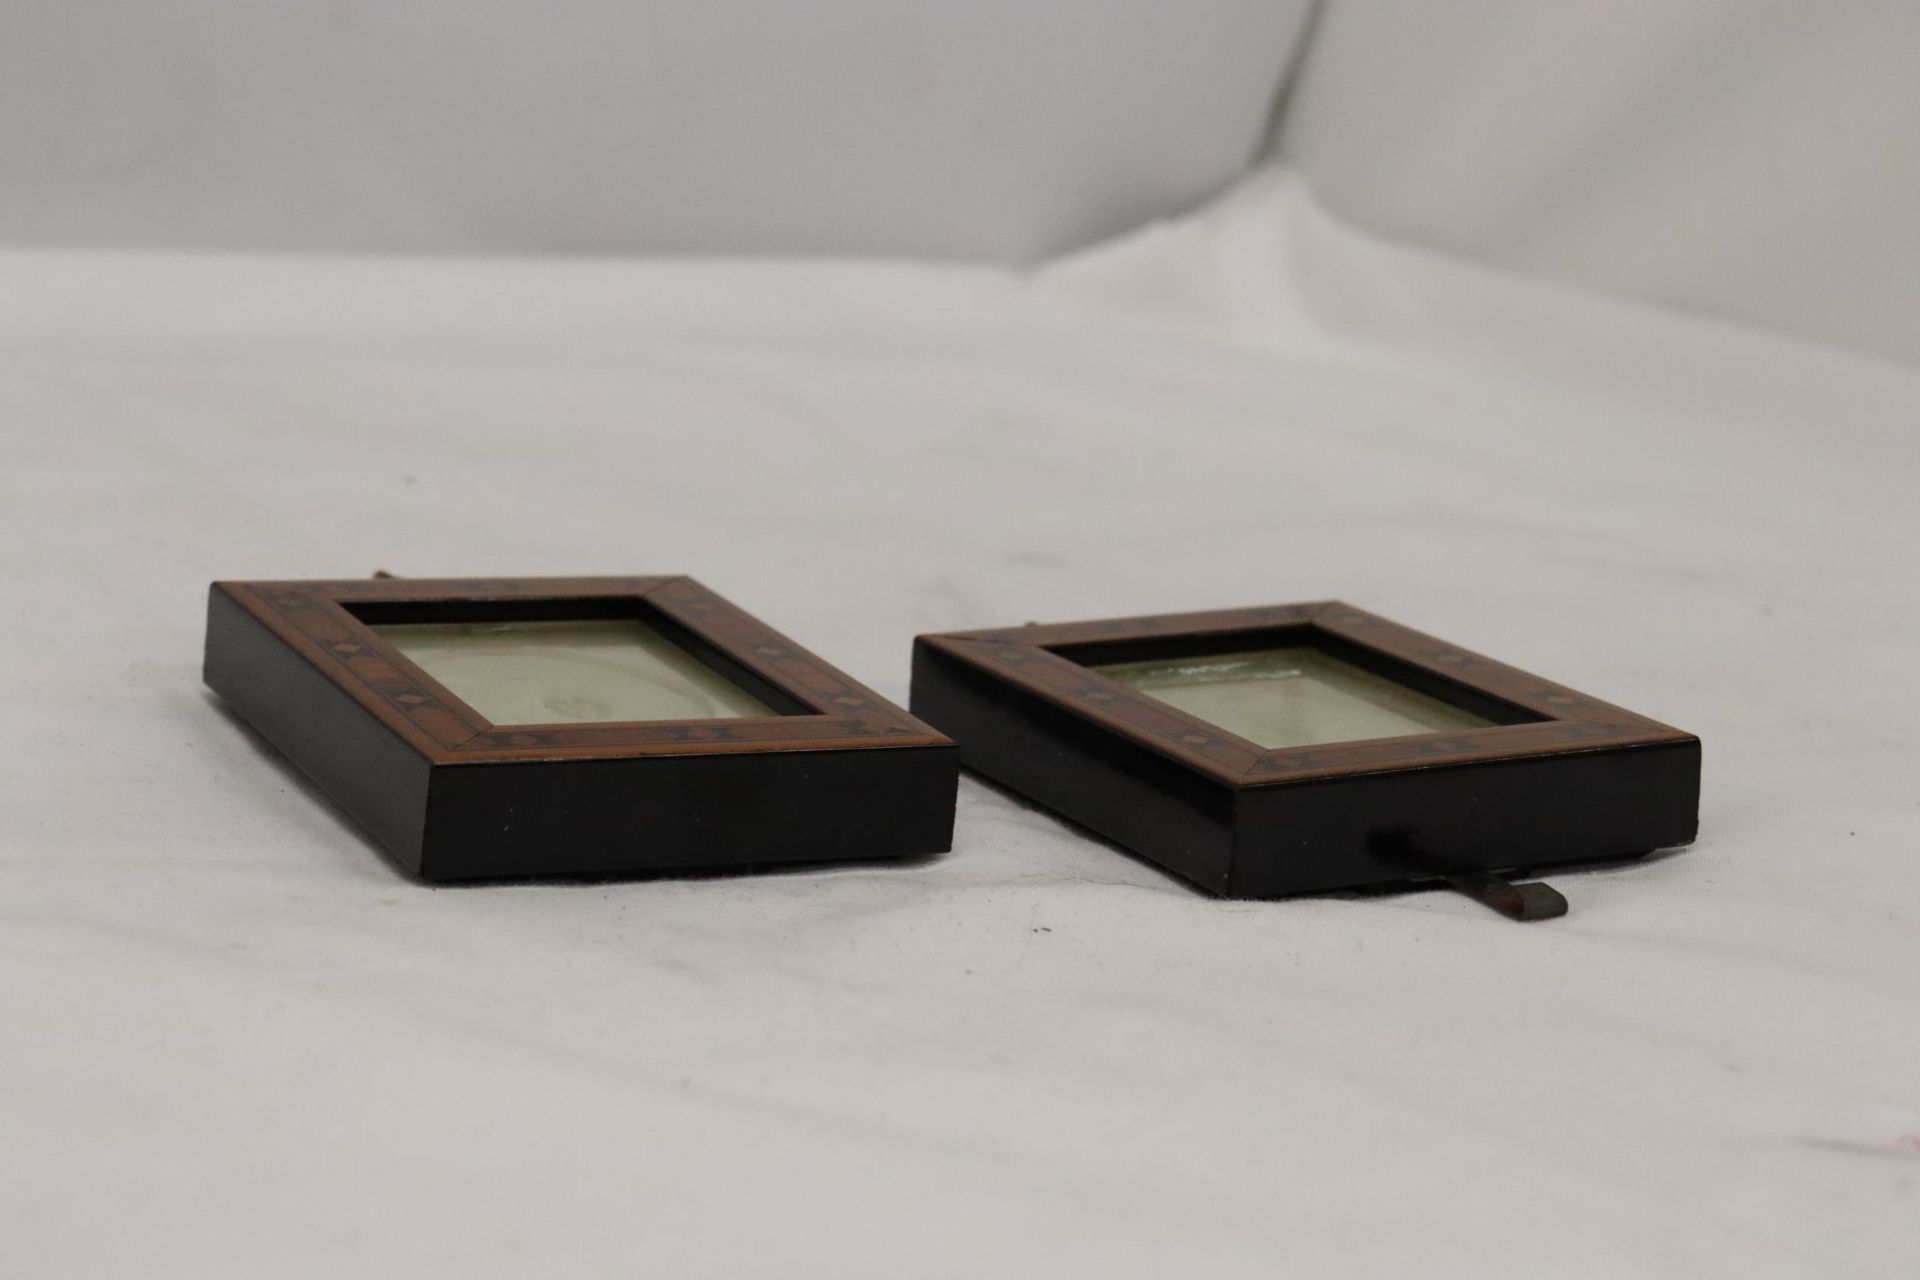 A PAIR OF SMALL INLAID WOODEN PHOTO FRAMES, 7CM X 8CM - Image 3 of 5